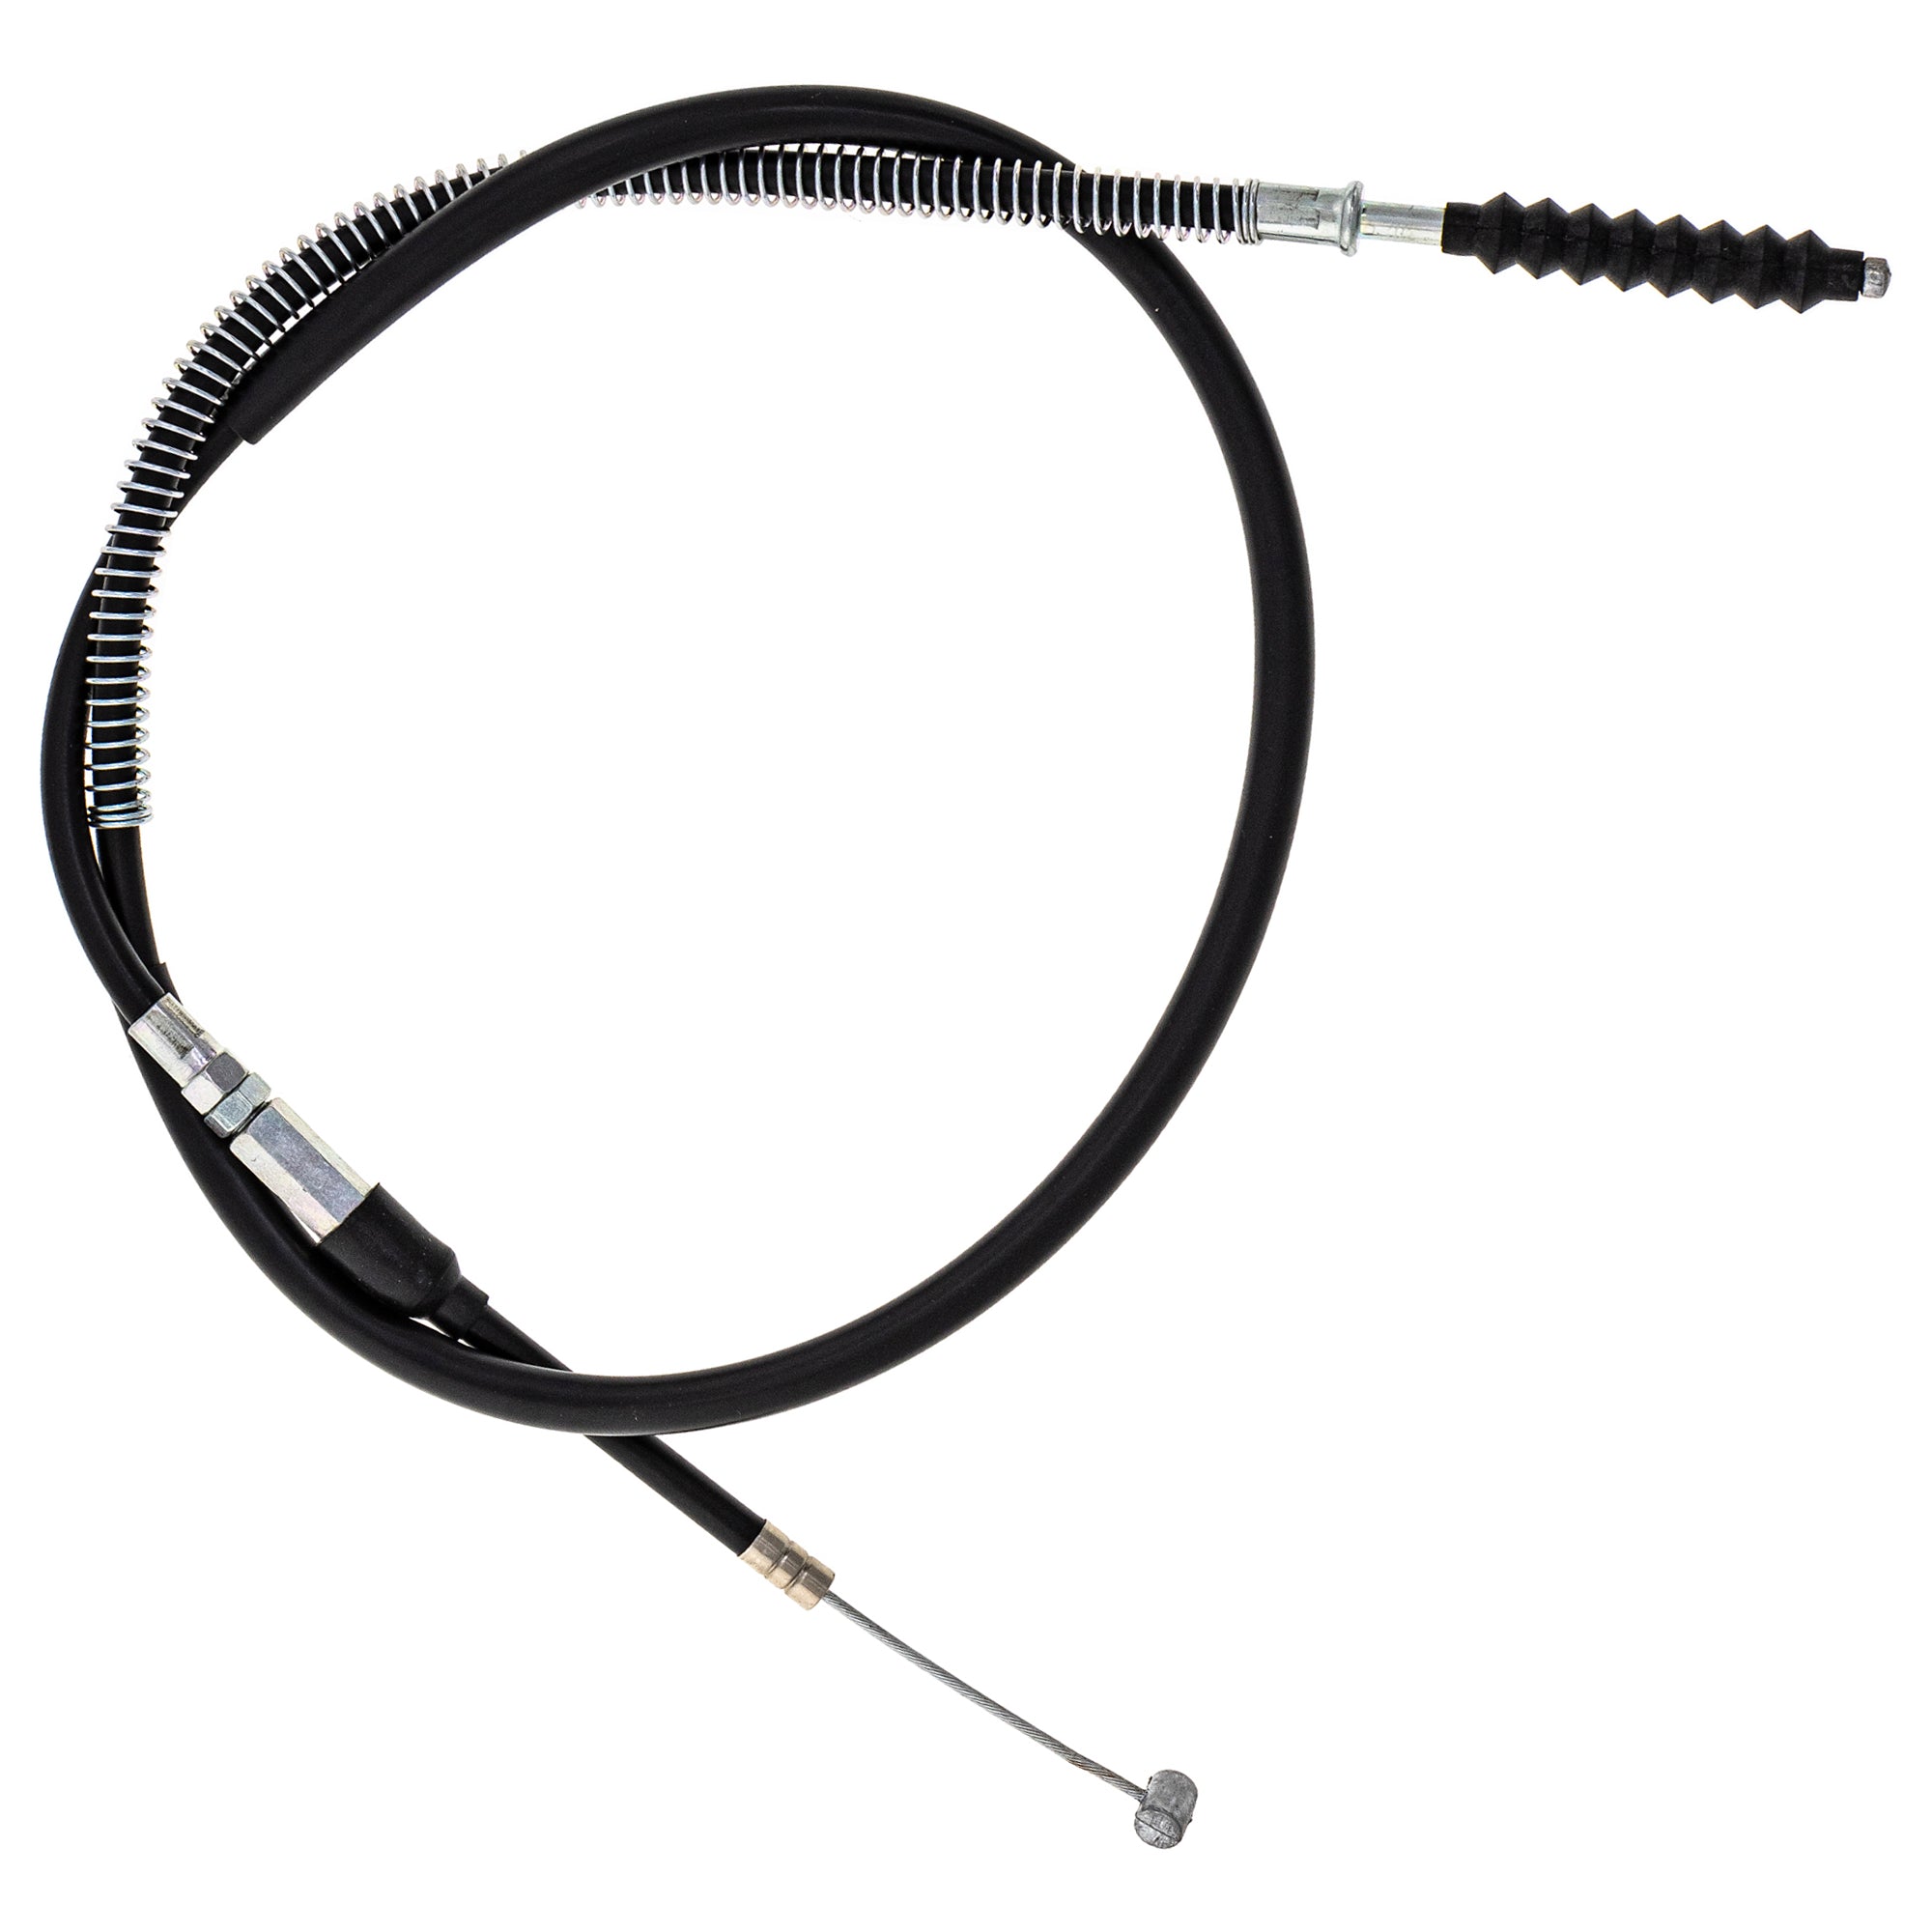 Clutch Cable for zOTHER ATC350X NICHE 519-CCB2795L